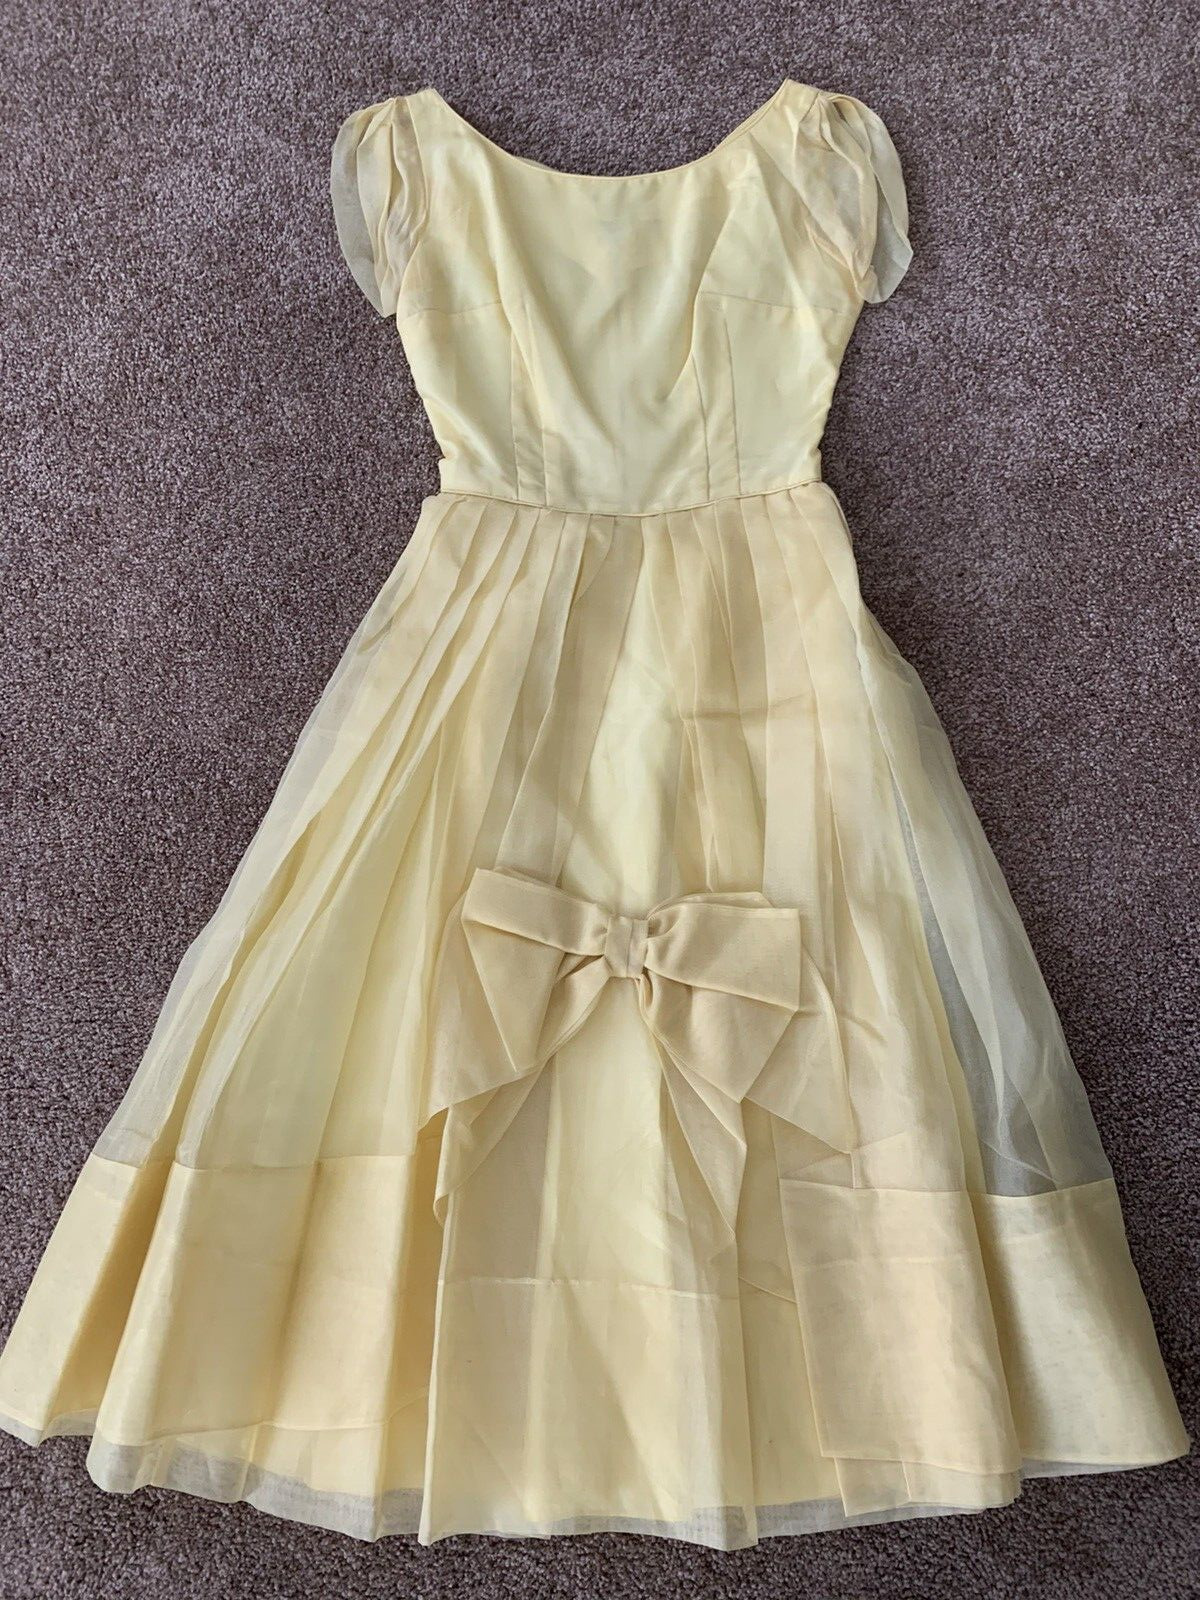 1950s 50s Vintage Pale Yellow Prom Dress Gown Size 7